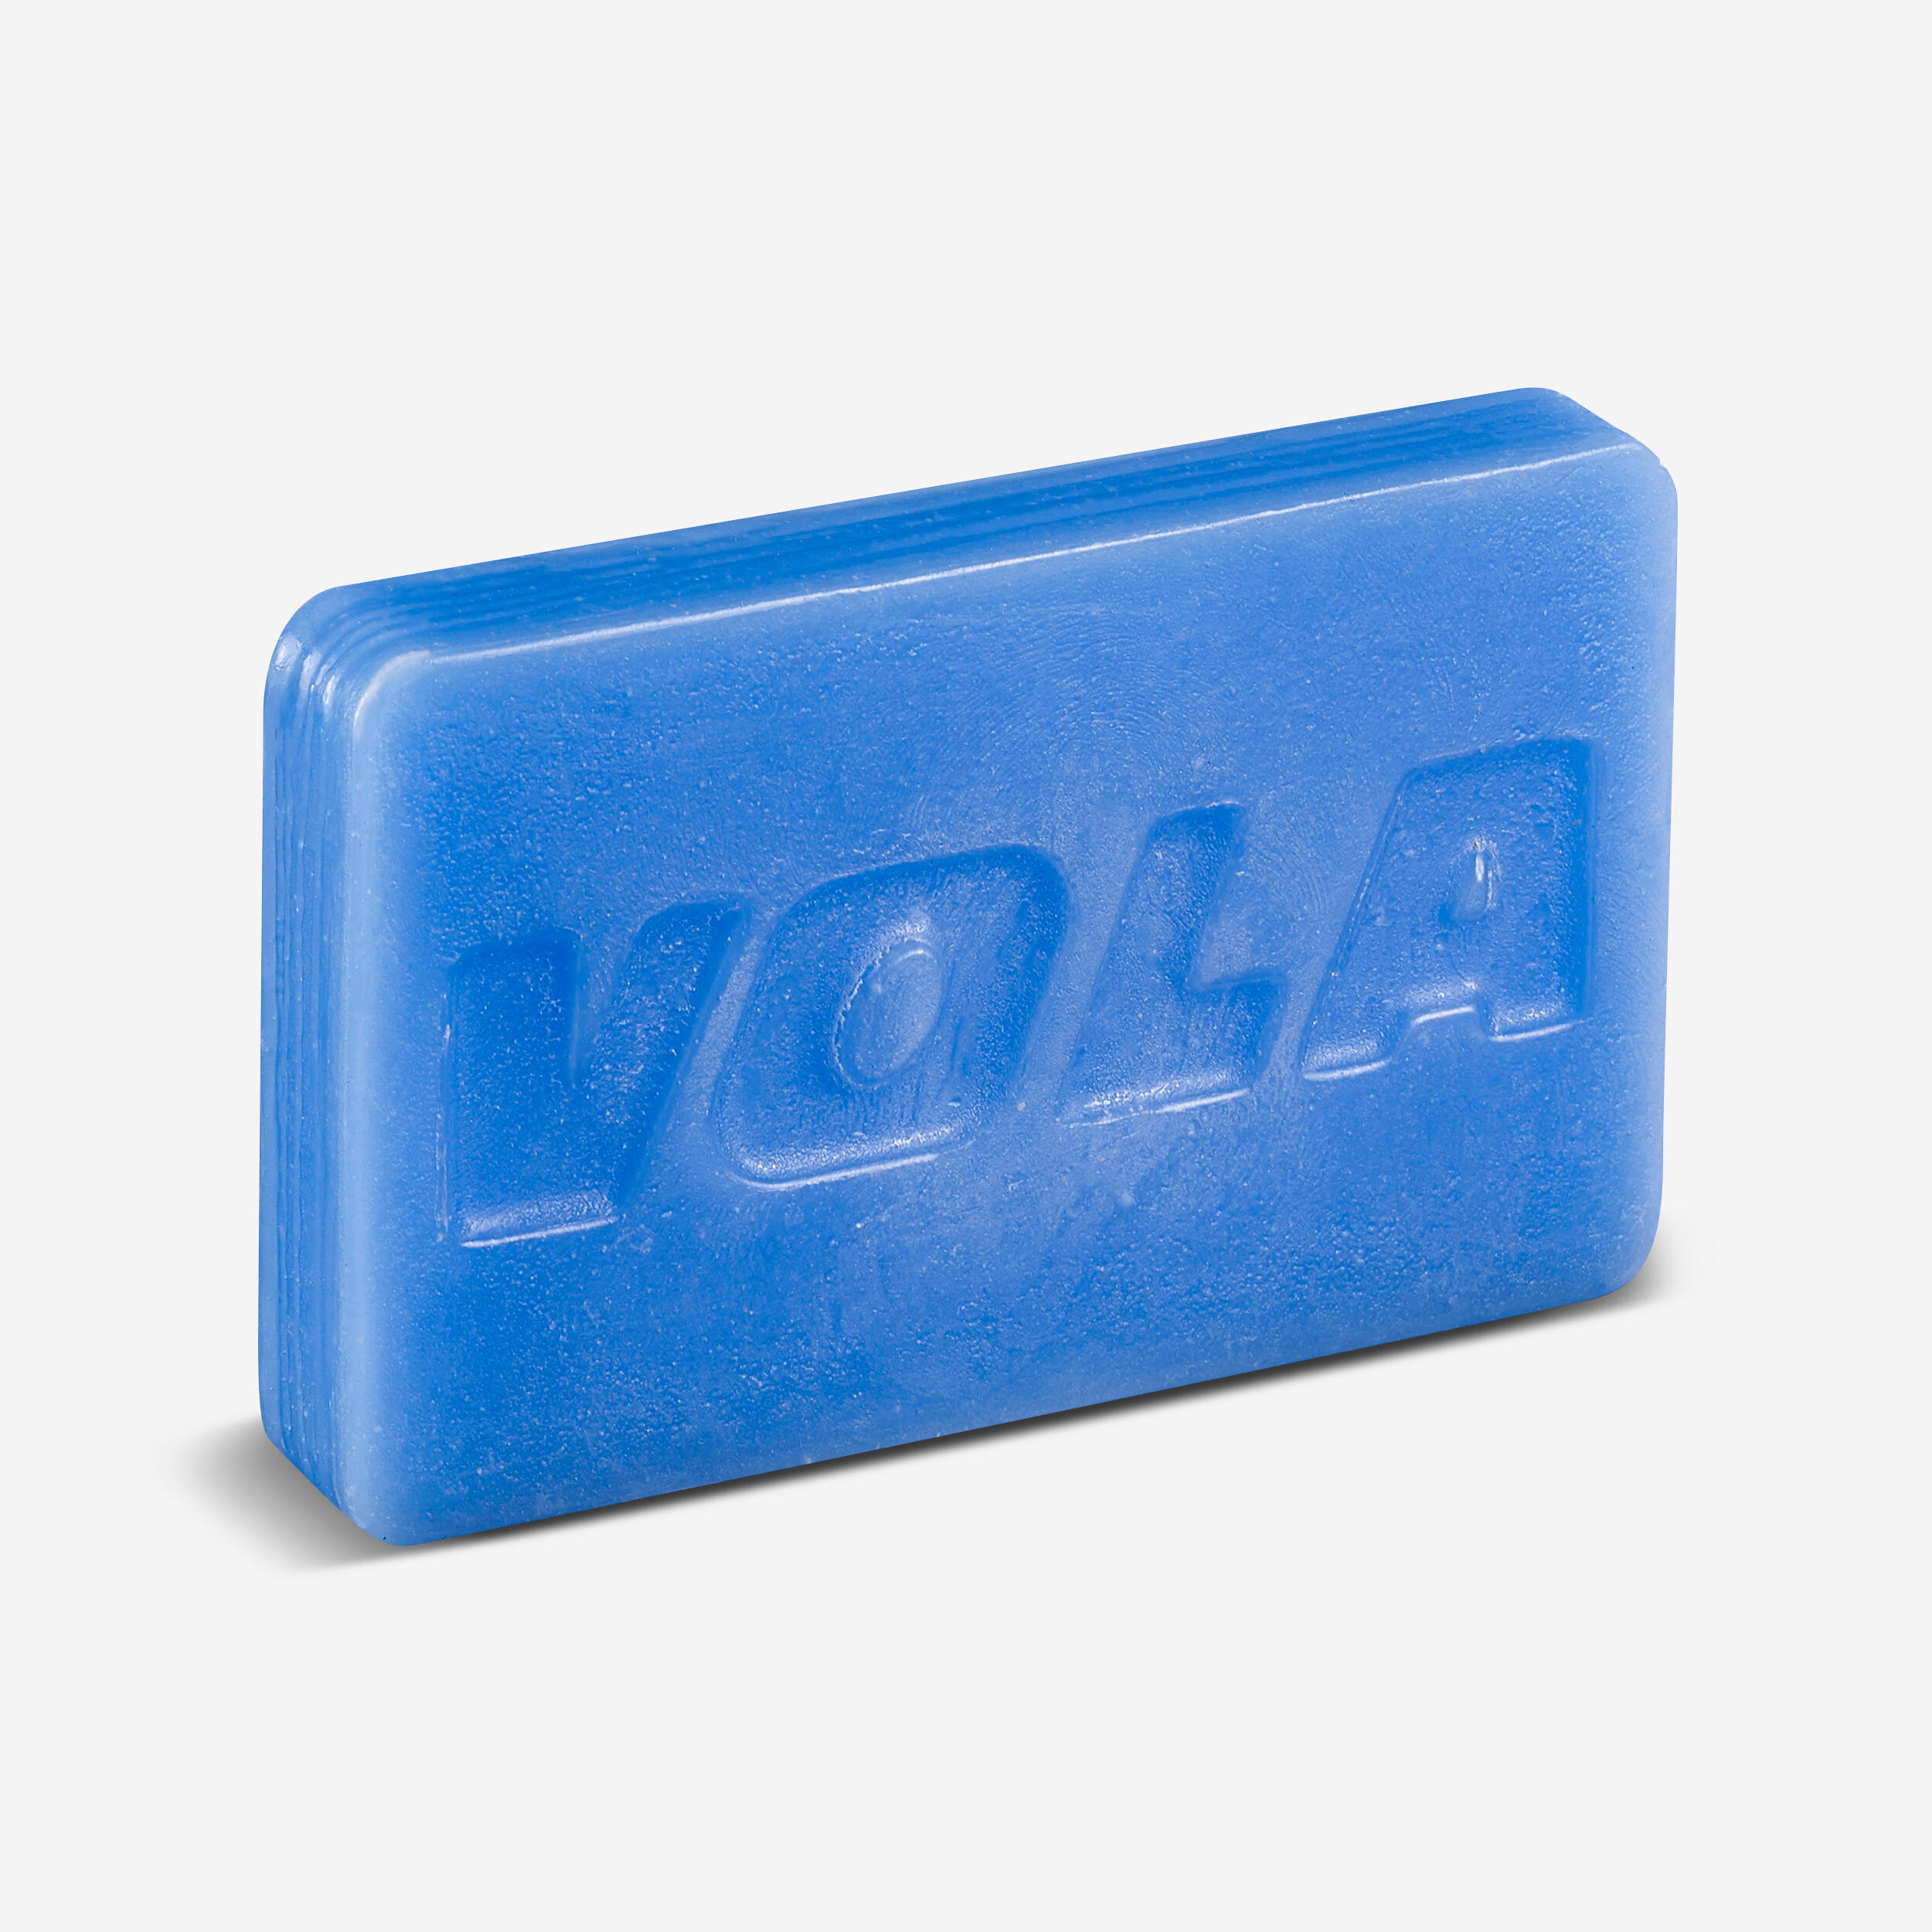 VOLA 110g competition wax for skis/snowboards, cold temperature (-25° / -15°)